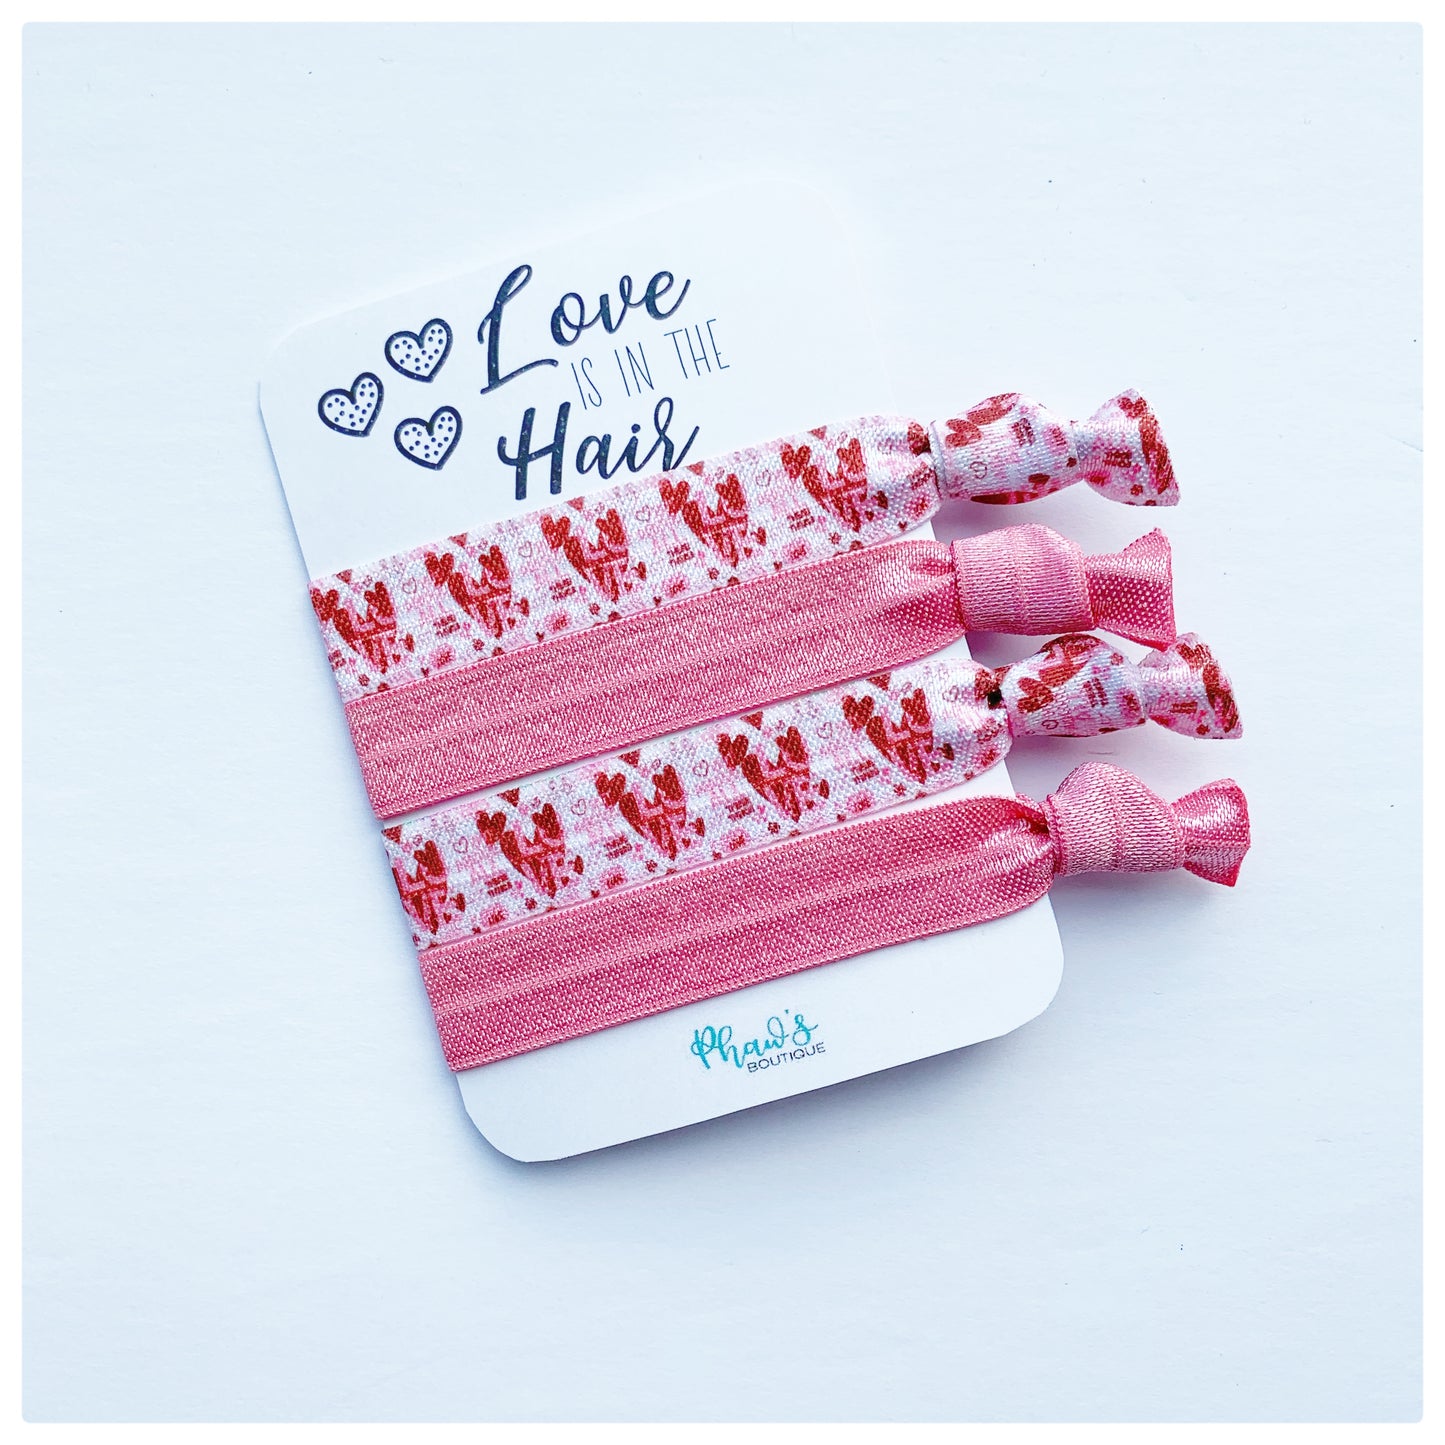 Love is in the Hair | Fun Motivational Cards Hair Tie Set